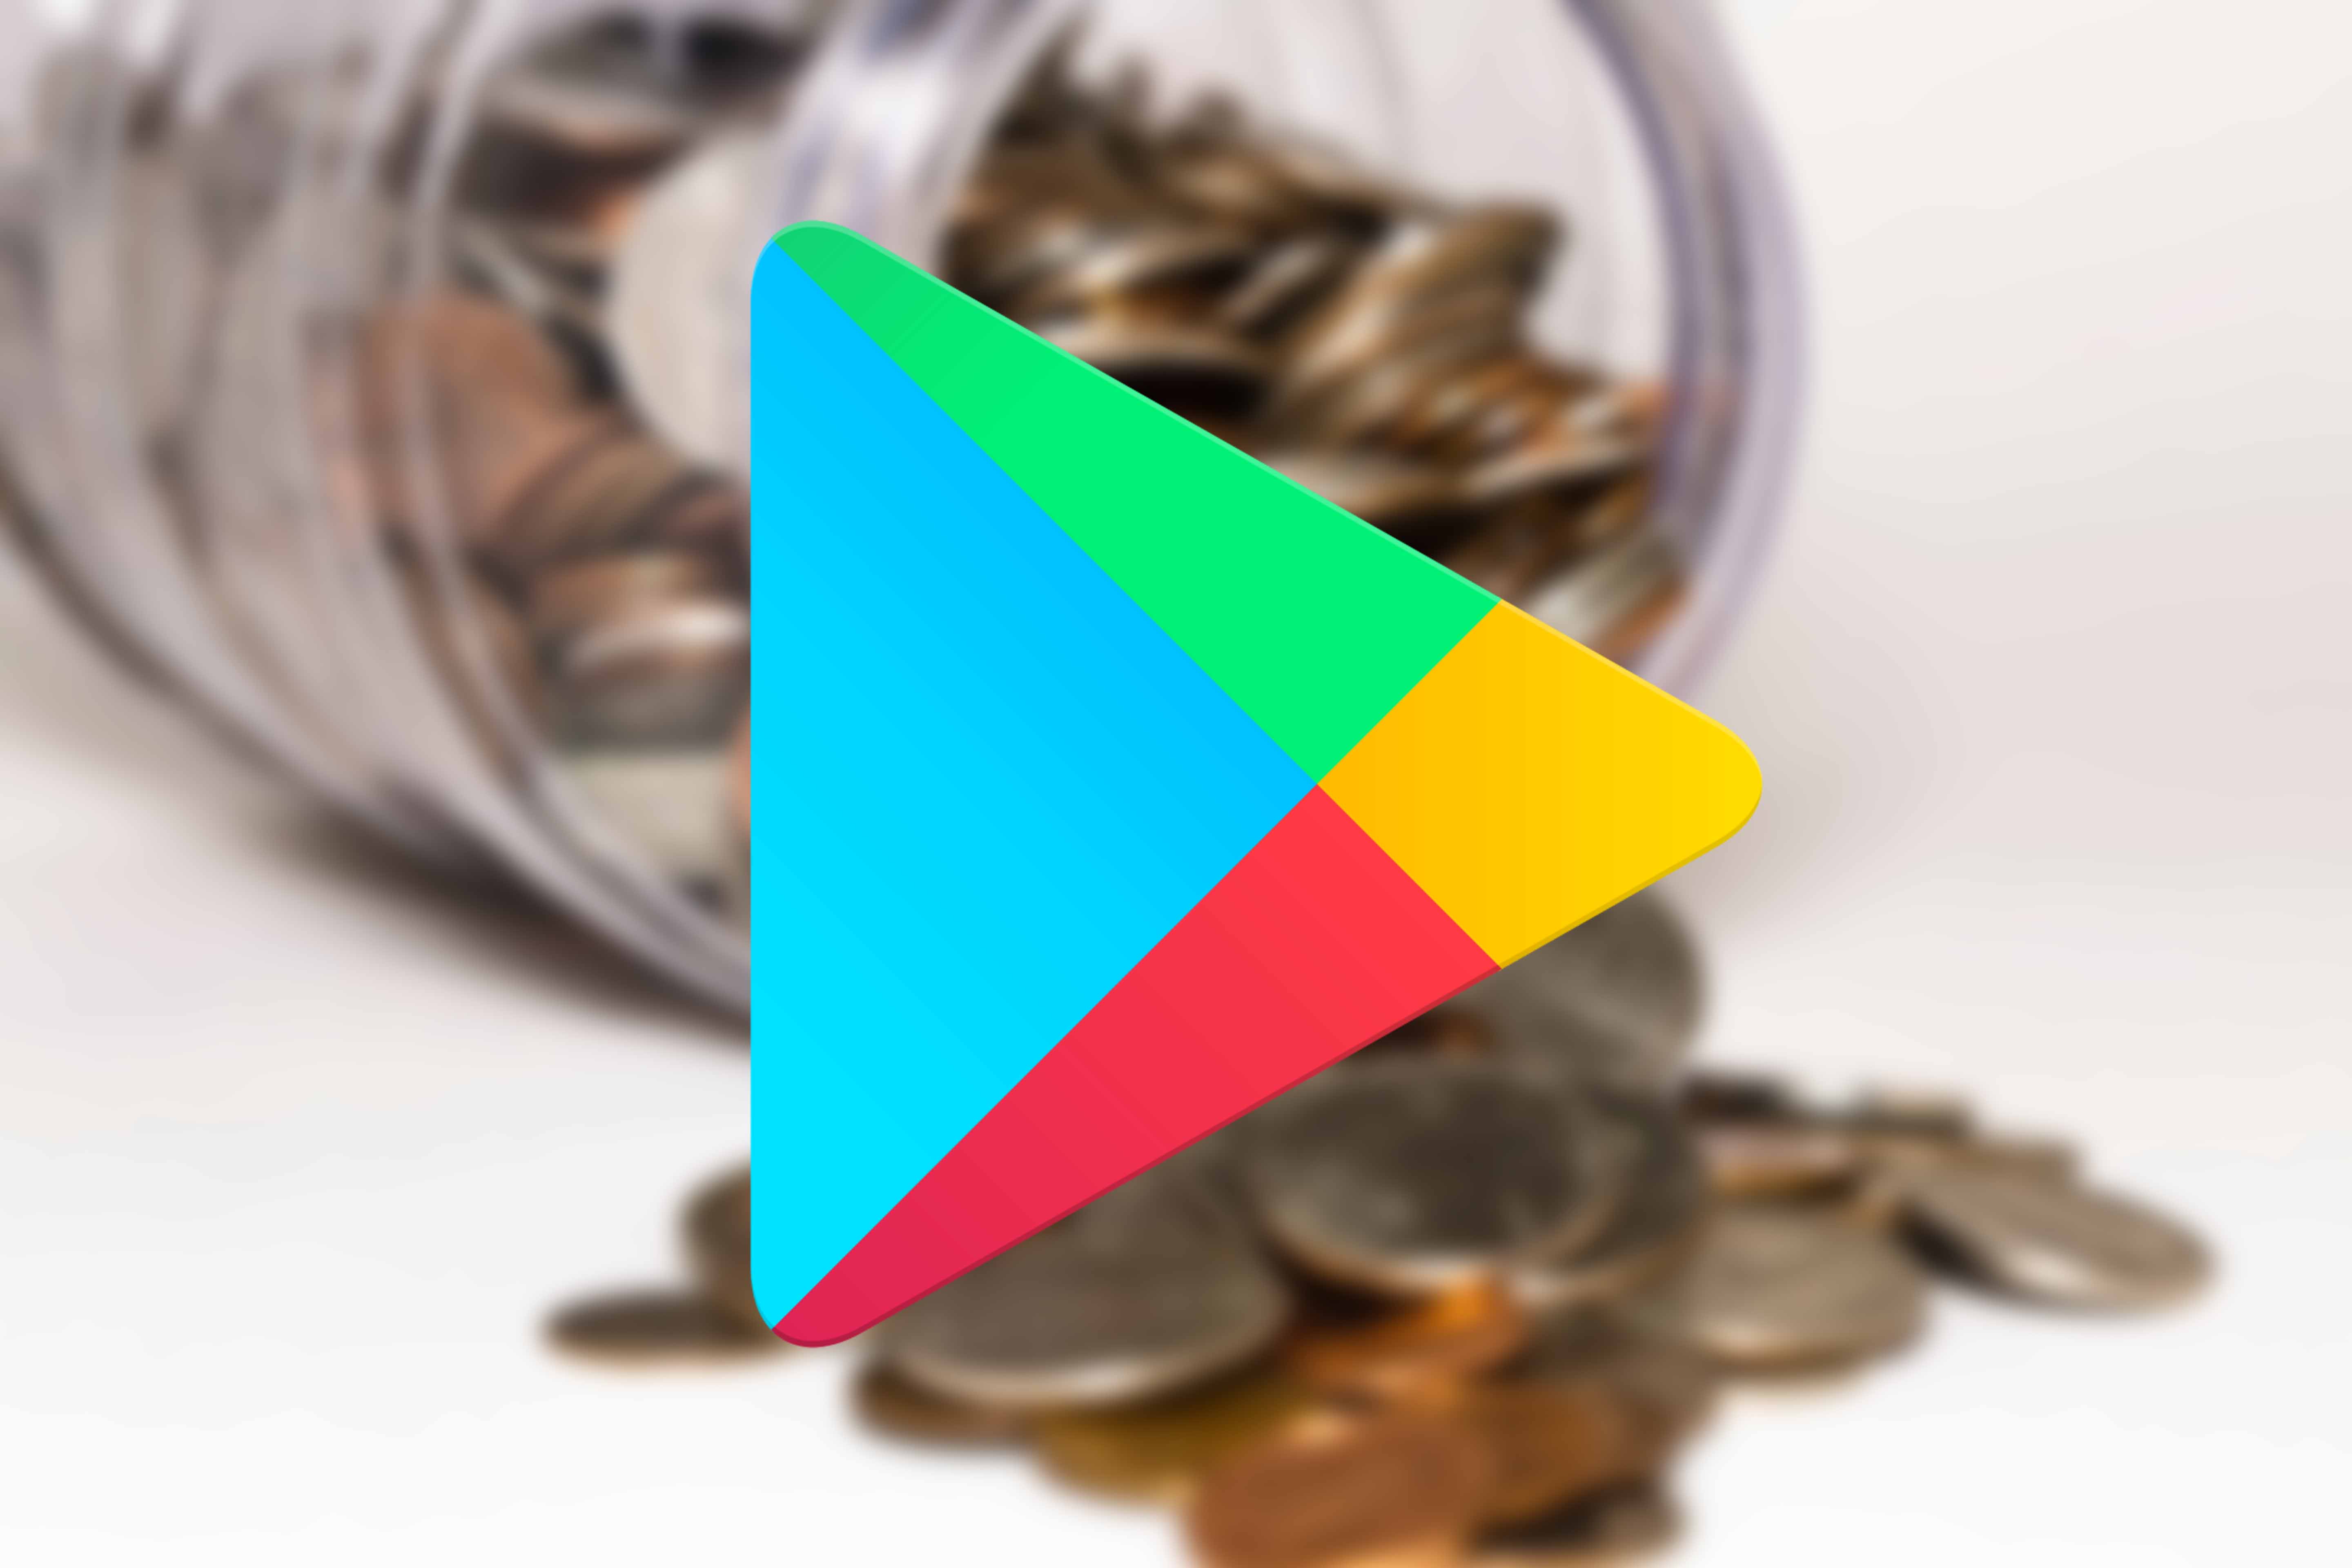 google play store download ios